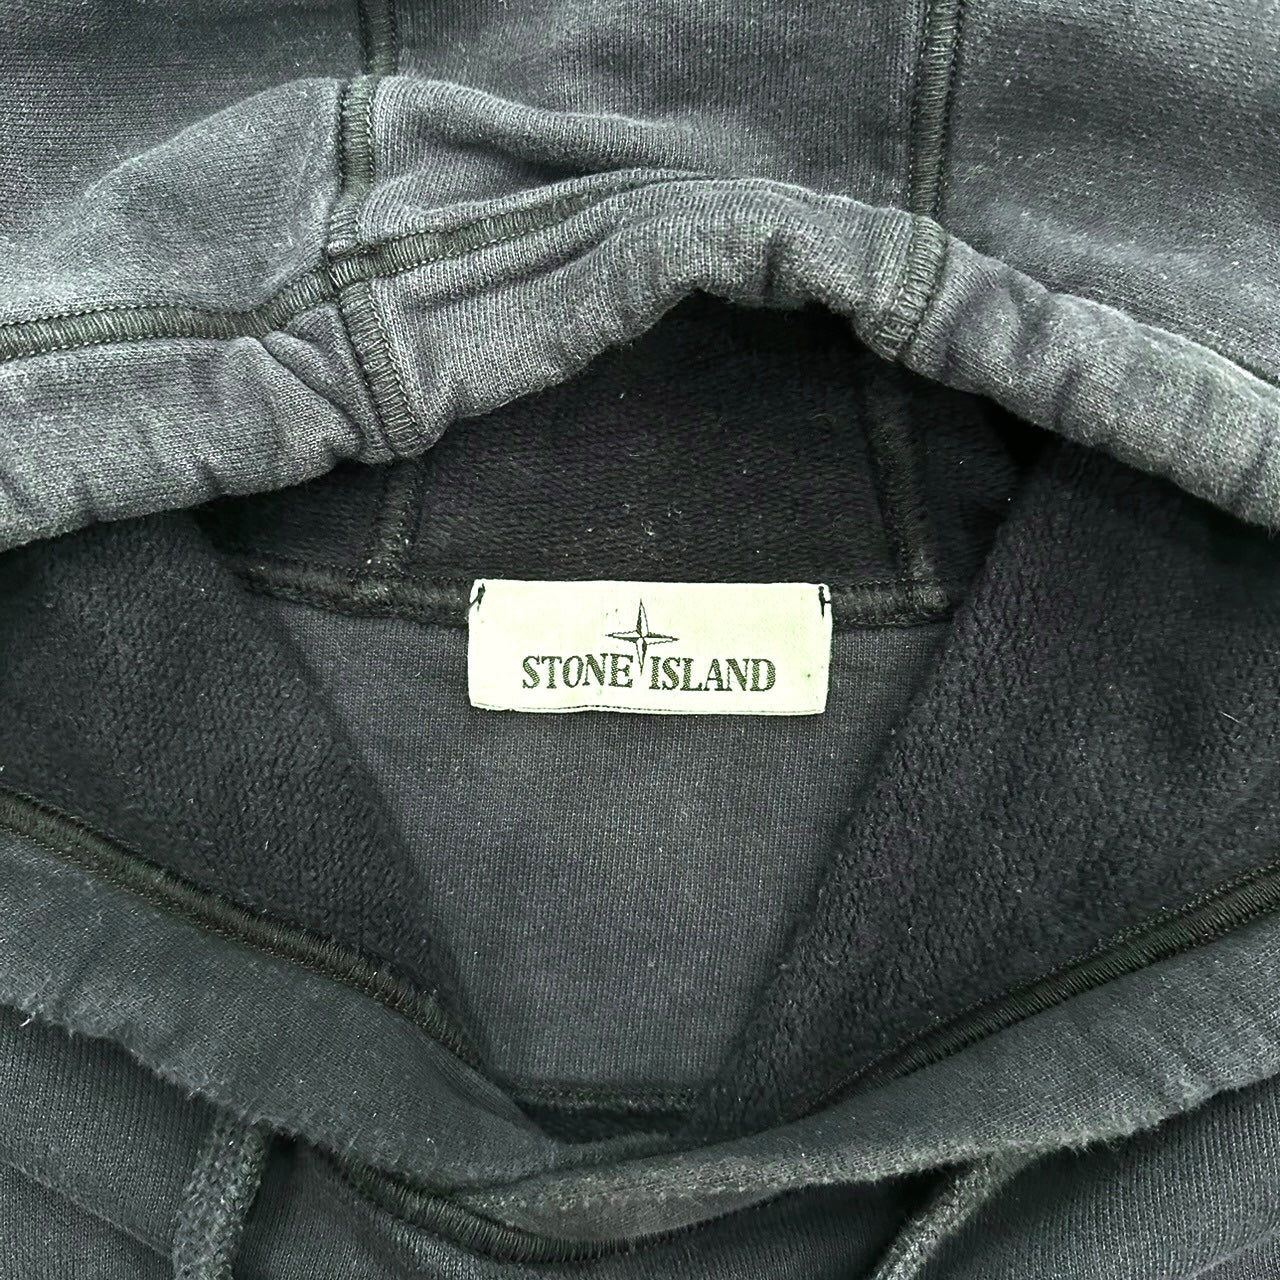 00's "Stone Island" pull over hoodie